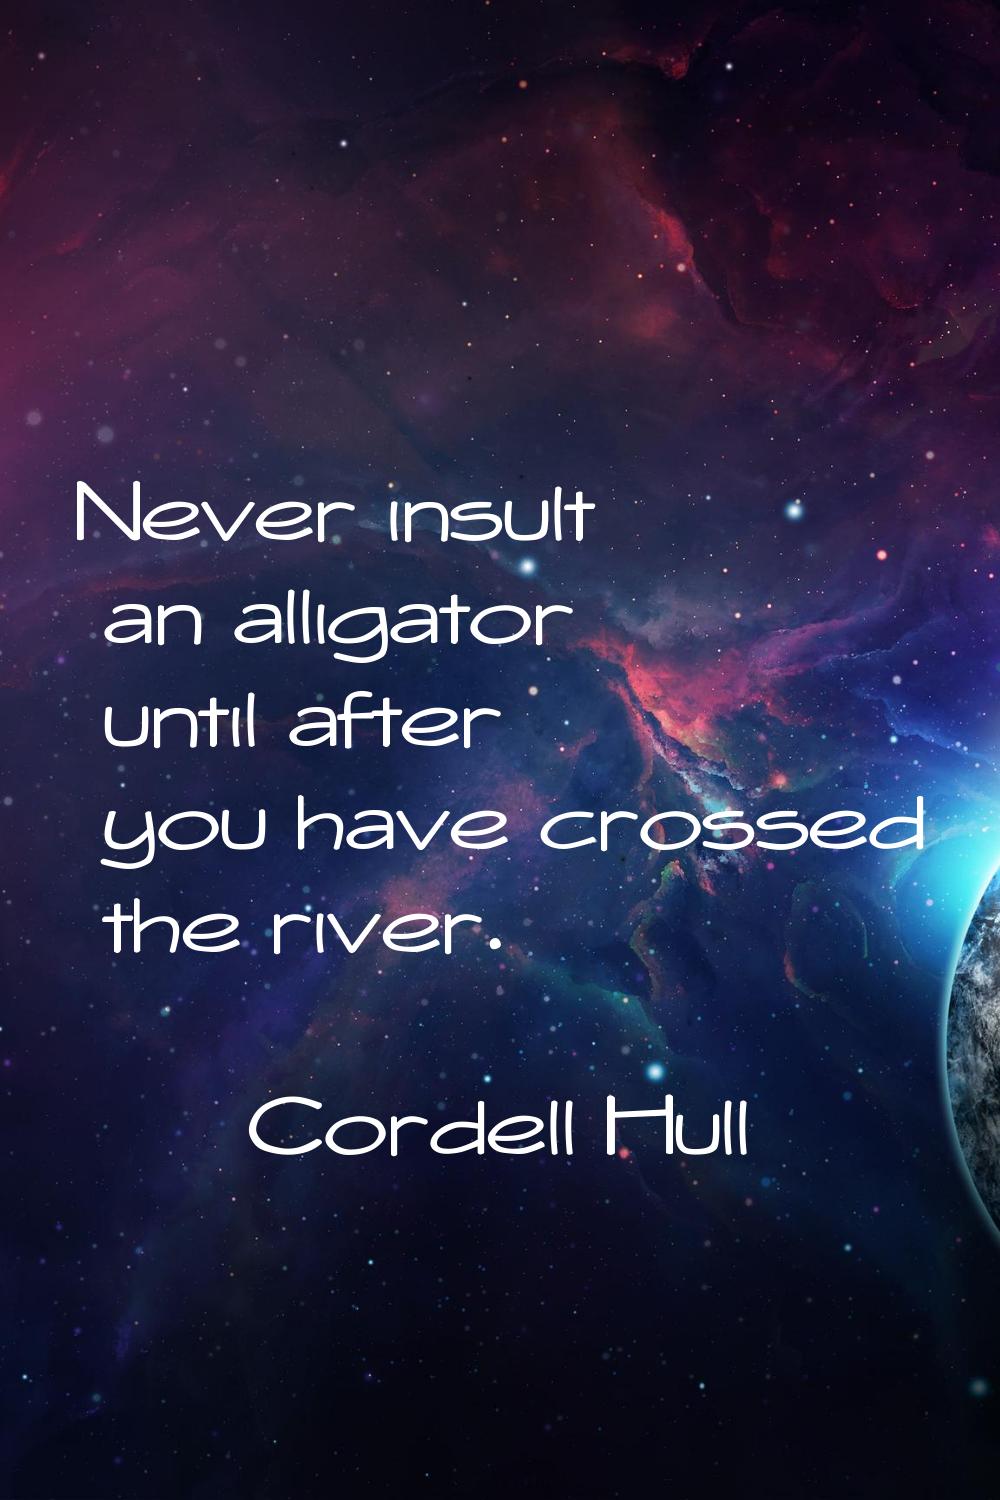 Never insult an alligator until after you have crossed the river.